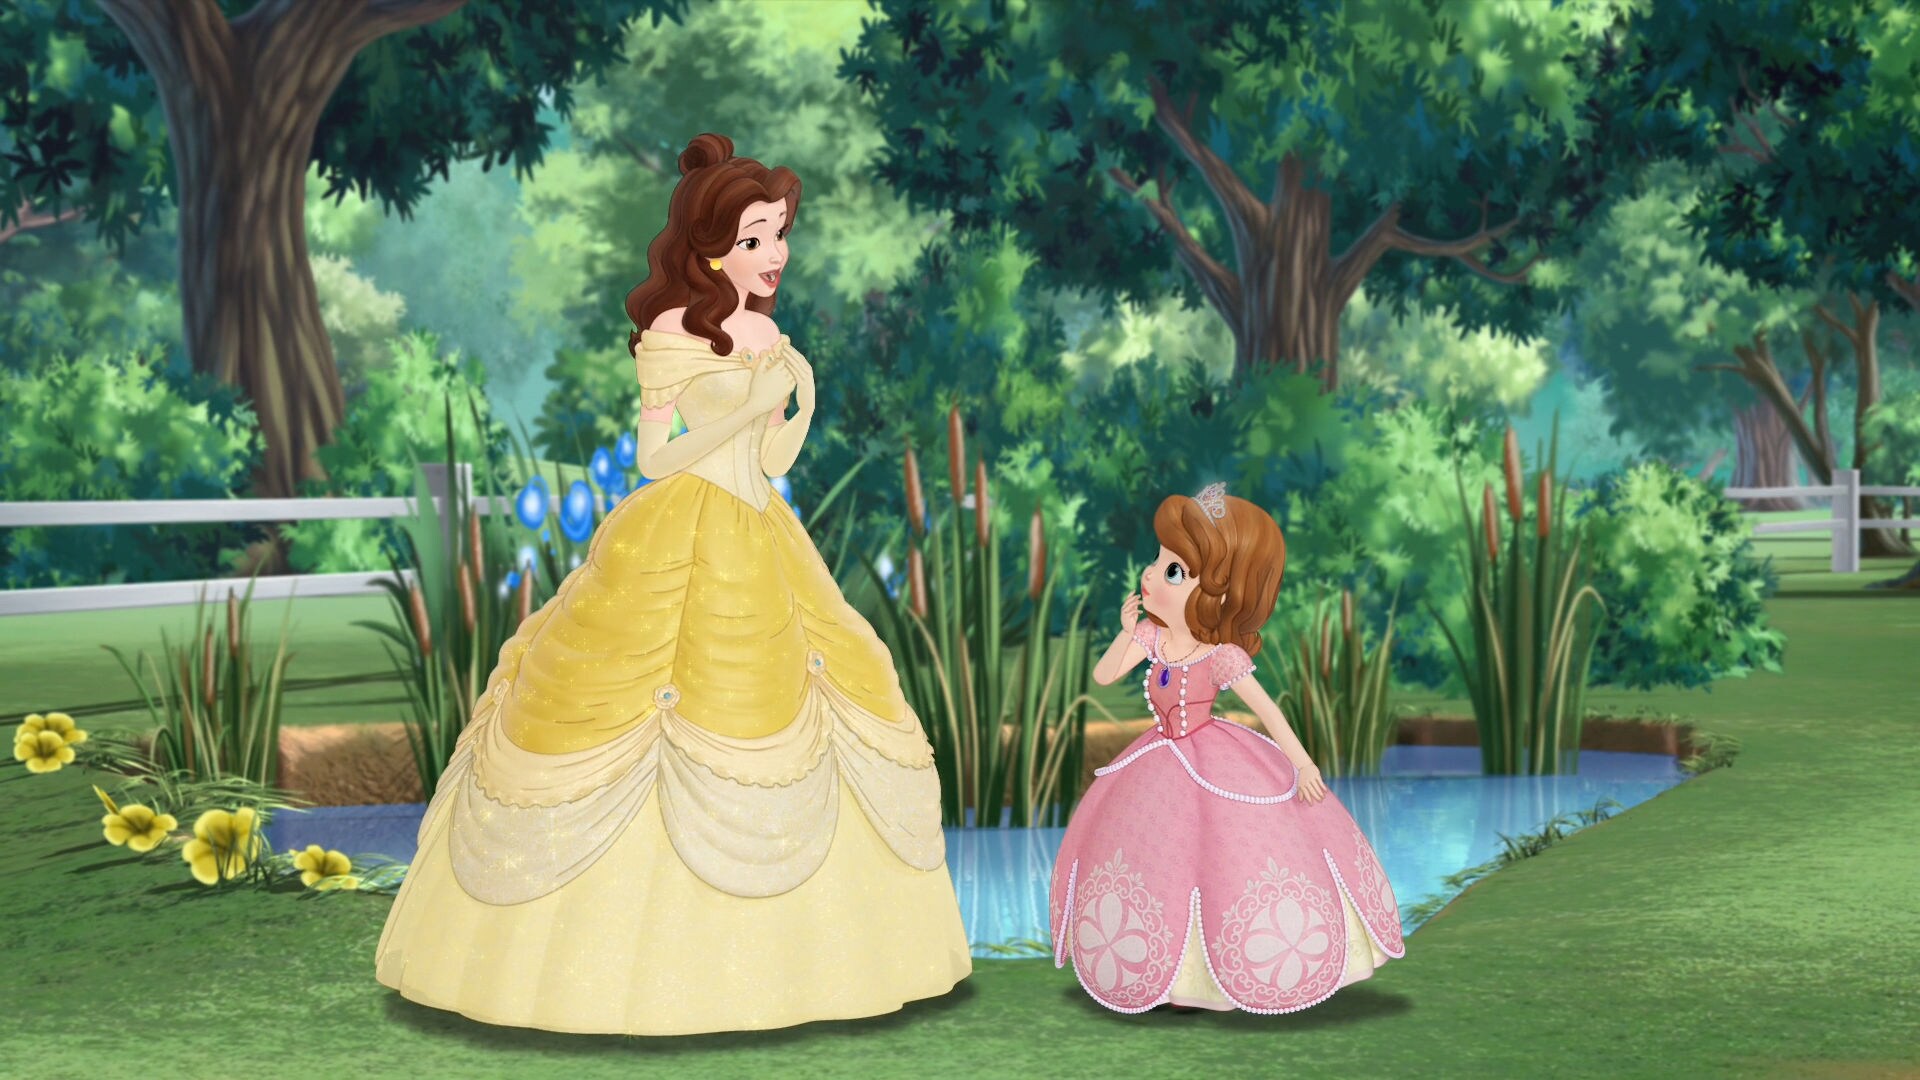 sofia the first outfits